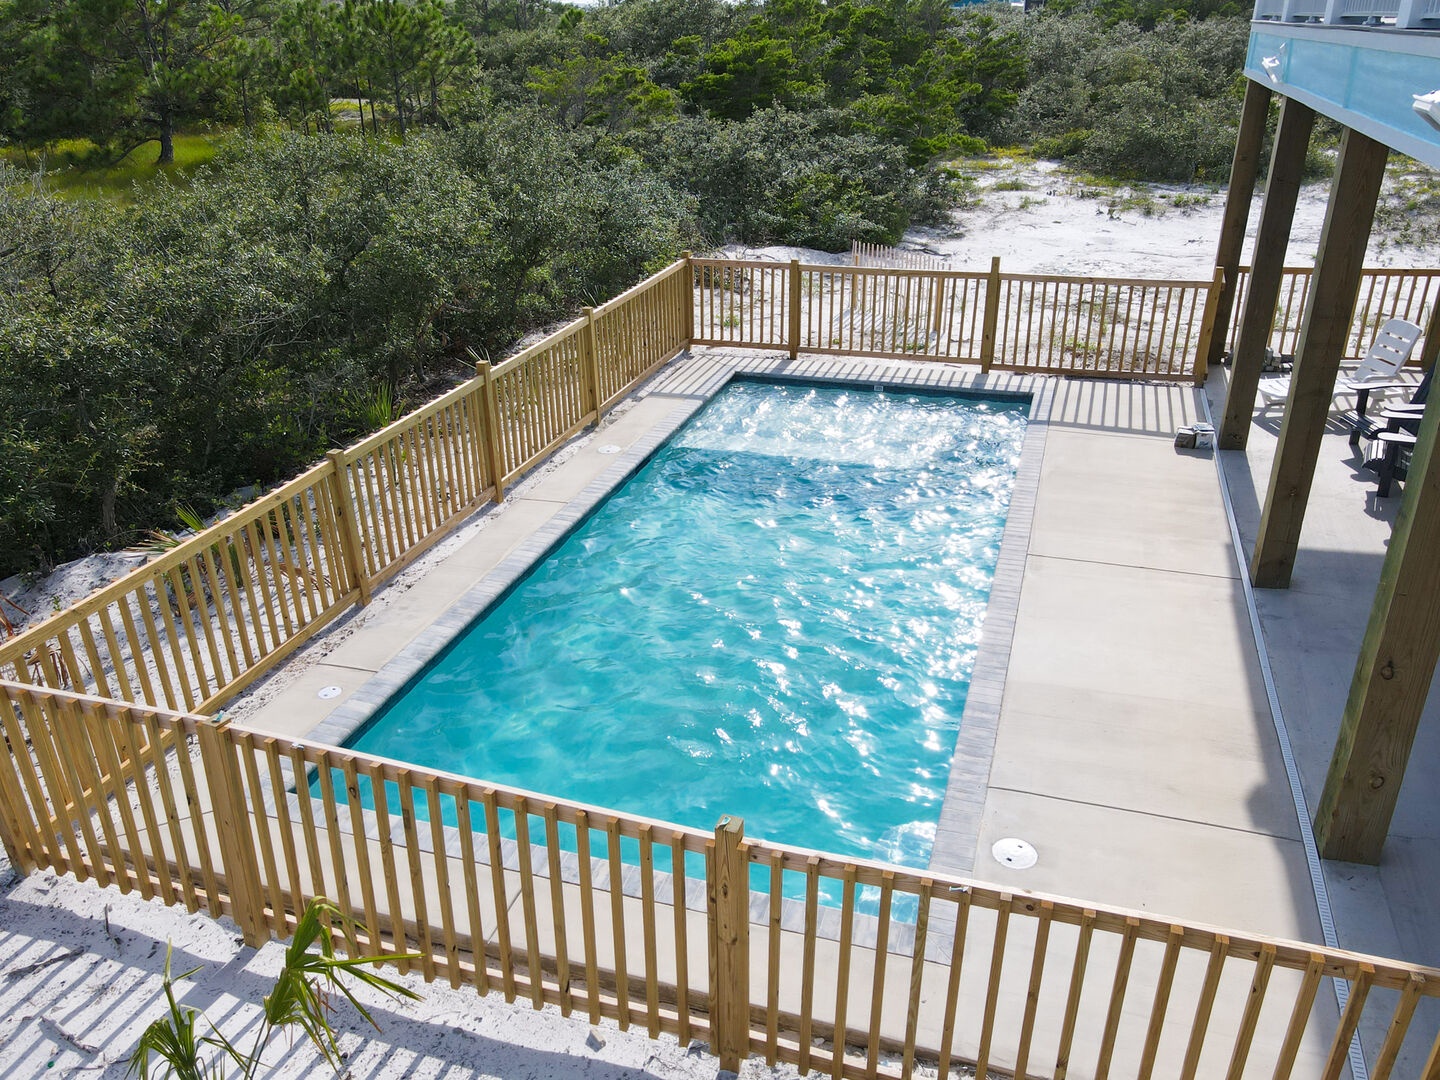 Large private pool with a secure fenced in area plus seating